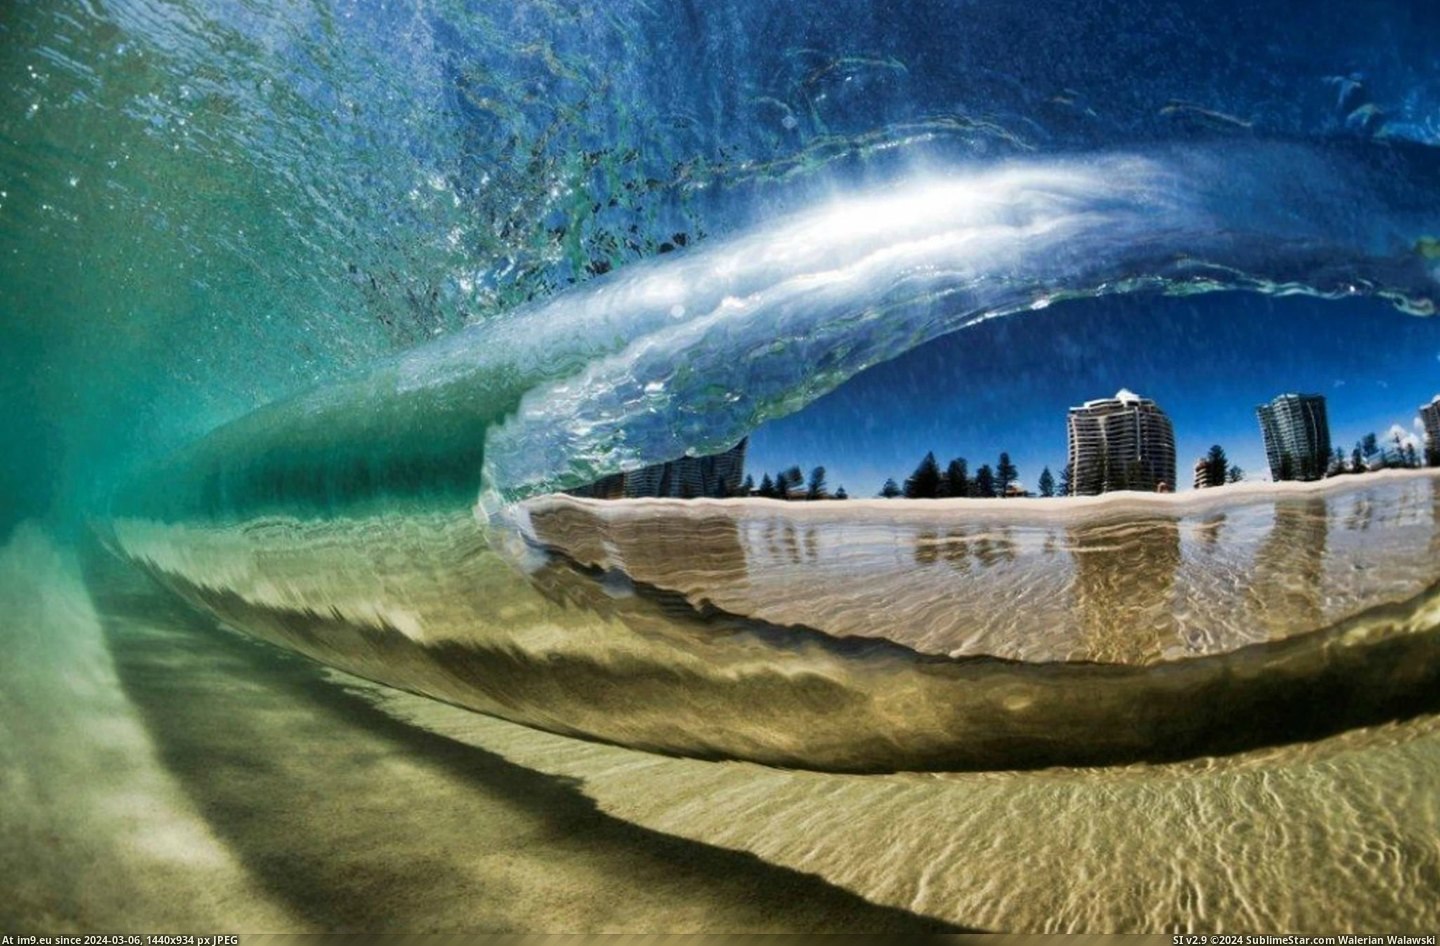  #Wave  [Pics] A view from under the wave. Pic. (Obraz z album My r/PICS favs))